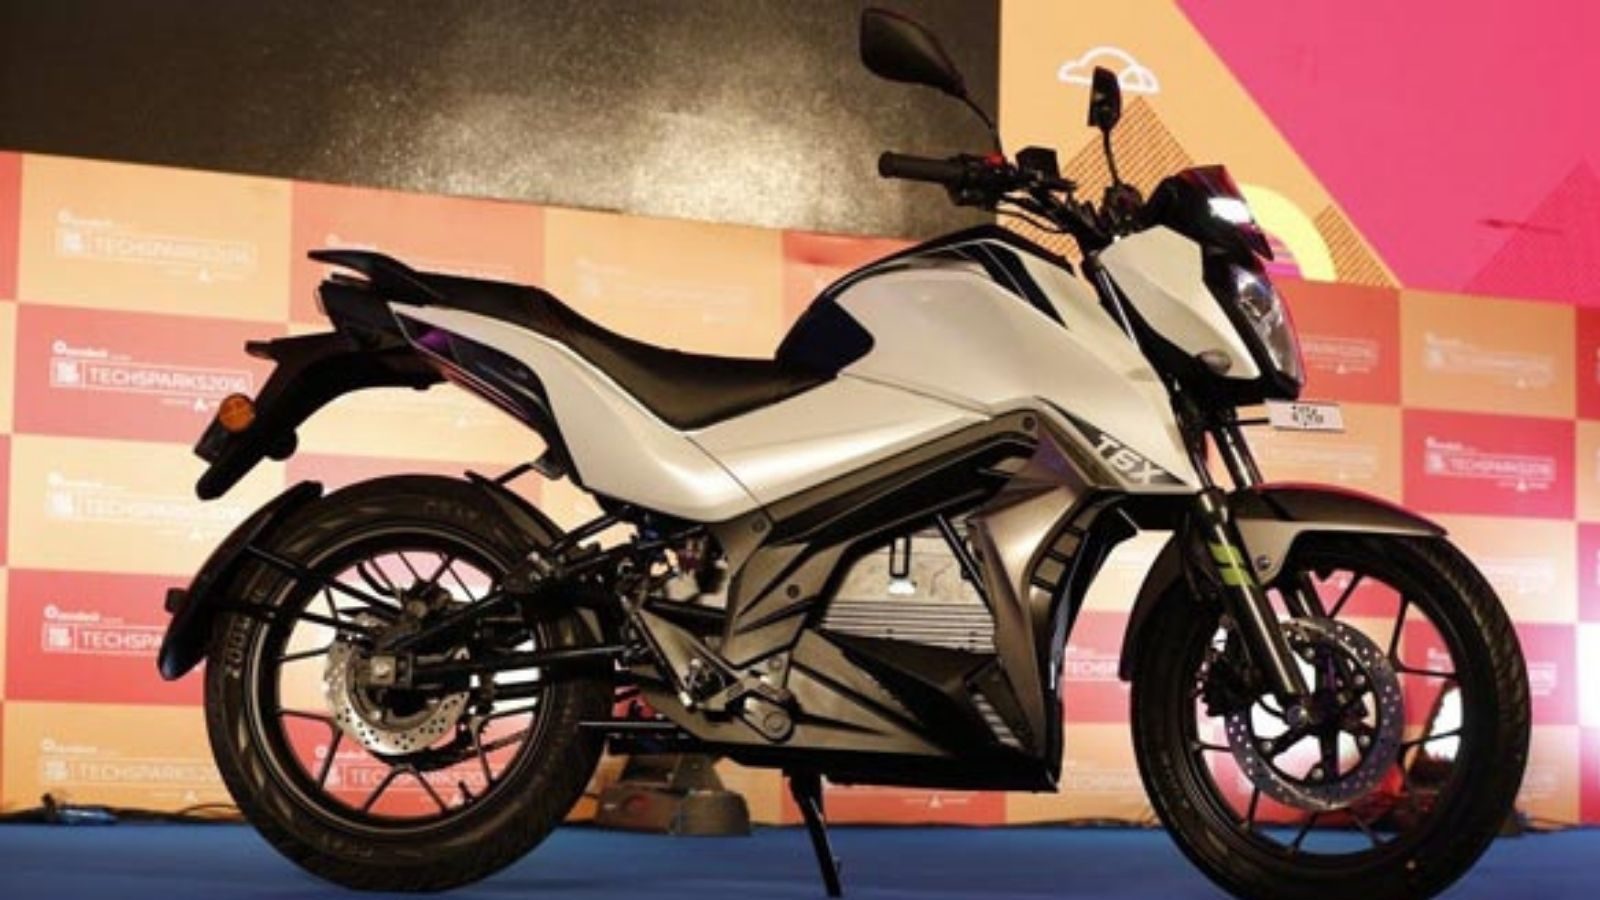 automobile e bike tork kratos launched today 75th republic day one more e bike add in indian electric two wheeler segment know price and features kcnd - tork की मेड-इन-इंडिया ई-बाइक लॉन्च,